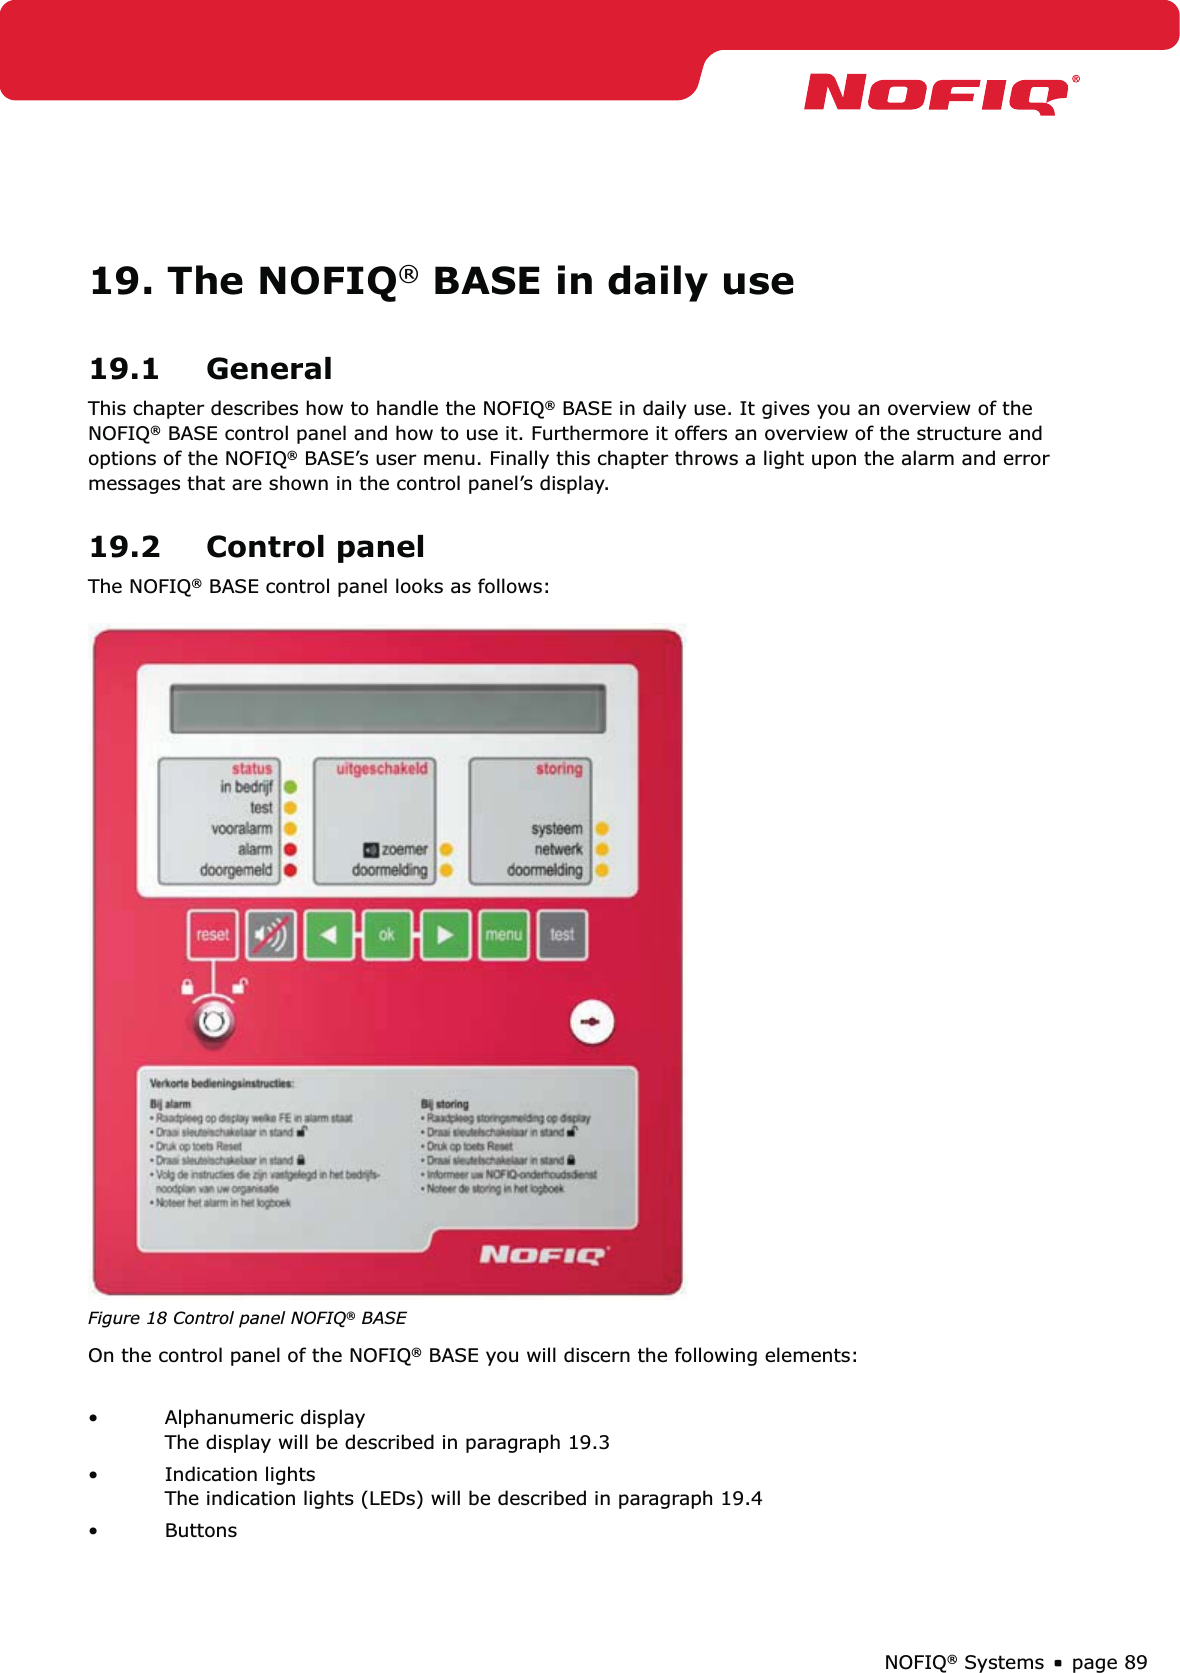 page 89NOFIQ® Systems19. The NOFIQ® BASE in daily use19.1 GeneralThis chapter describes how to handle the NOFIQ® BASE in daily use. It gives you an overview of the NOFIQ® BASE control panel and how to use it. Furthermore it offers an overview of the structure and options of the NOFIQ® BASE’s user menu. Finally this chapter throws a light upon the alarm and error messages that are shown in the control panel’s display.19.2 Control panelThe NOFIQ® BASE control panel looks as follows: Figure 18 Control panel NOFIQ® BASEOn the control panel of the NOFIQ® BASE you will discern the following elements:Alphanumeric display • The display will be described in paragraph 19.3Indication lights • The indication lights (LEDs) will be described in paragraph 19.4Buttons • 